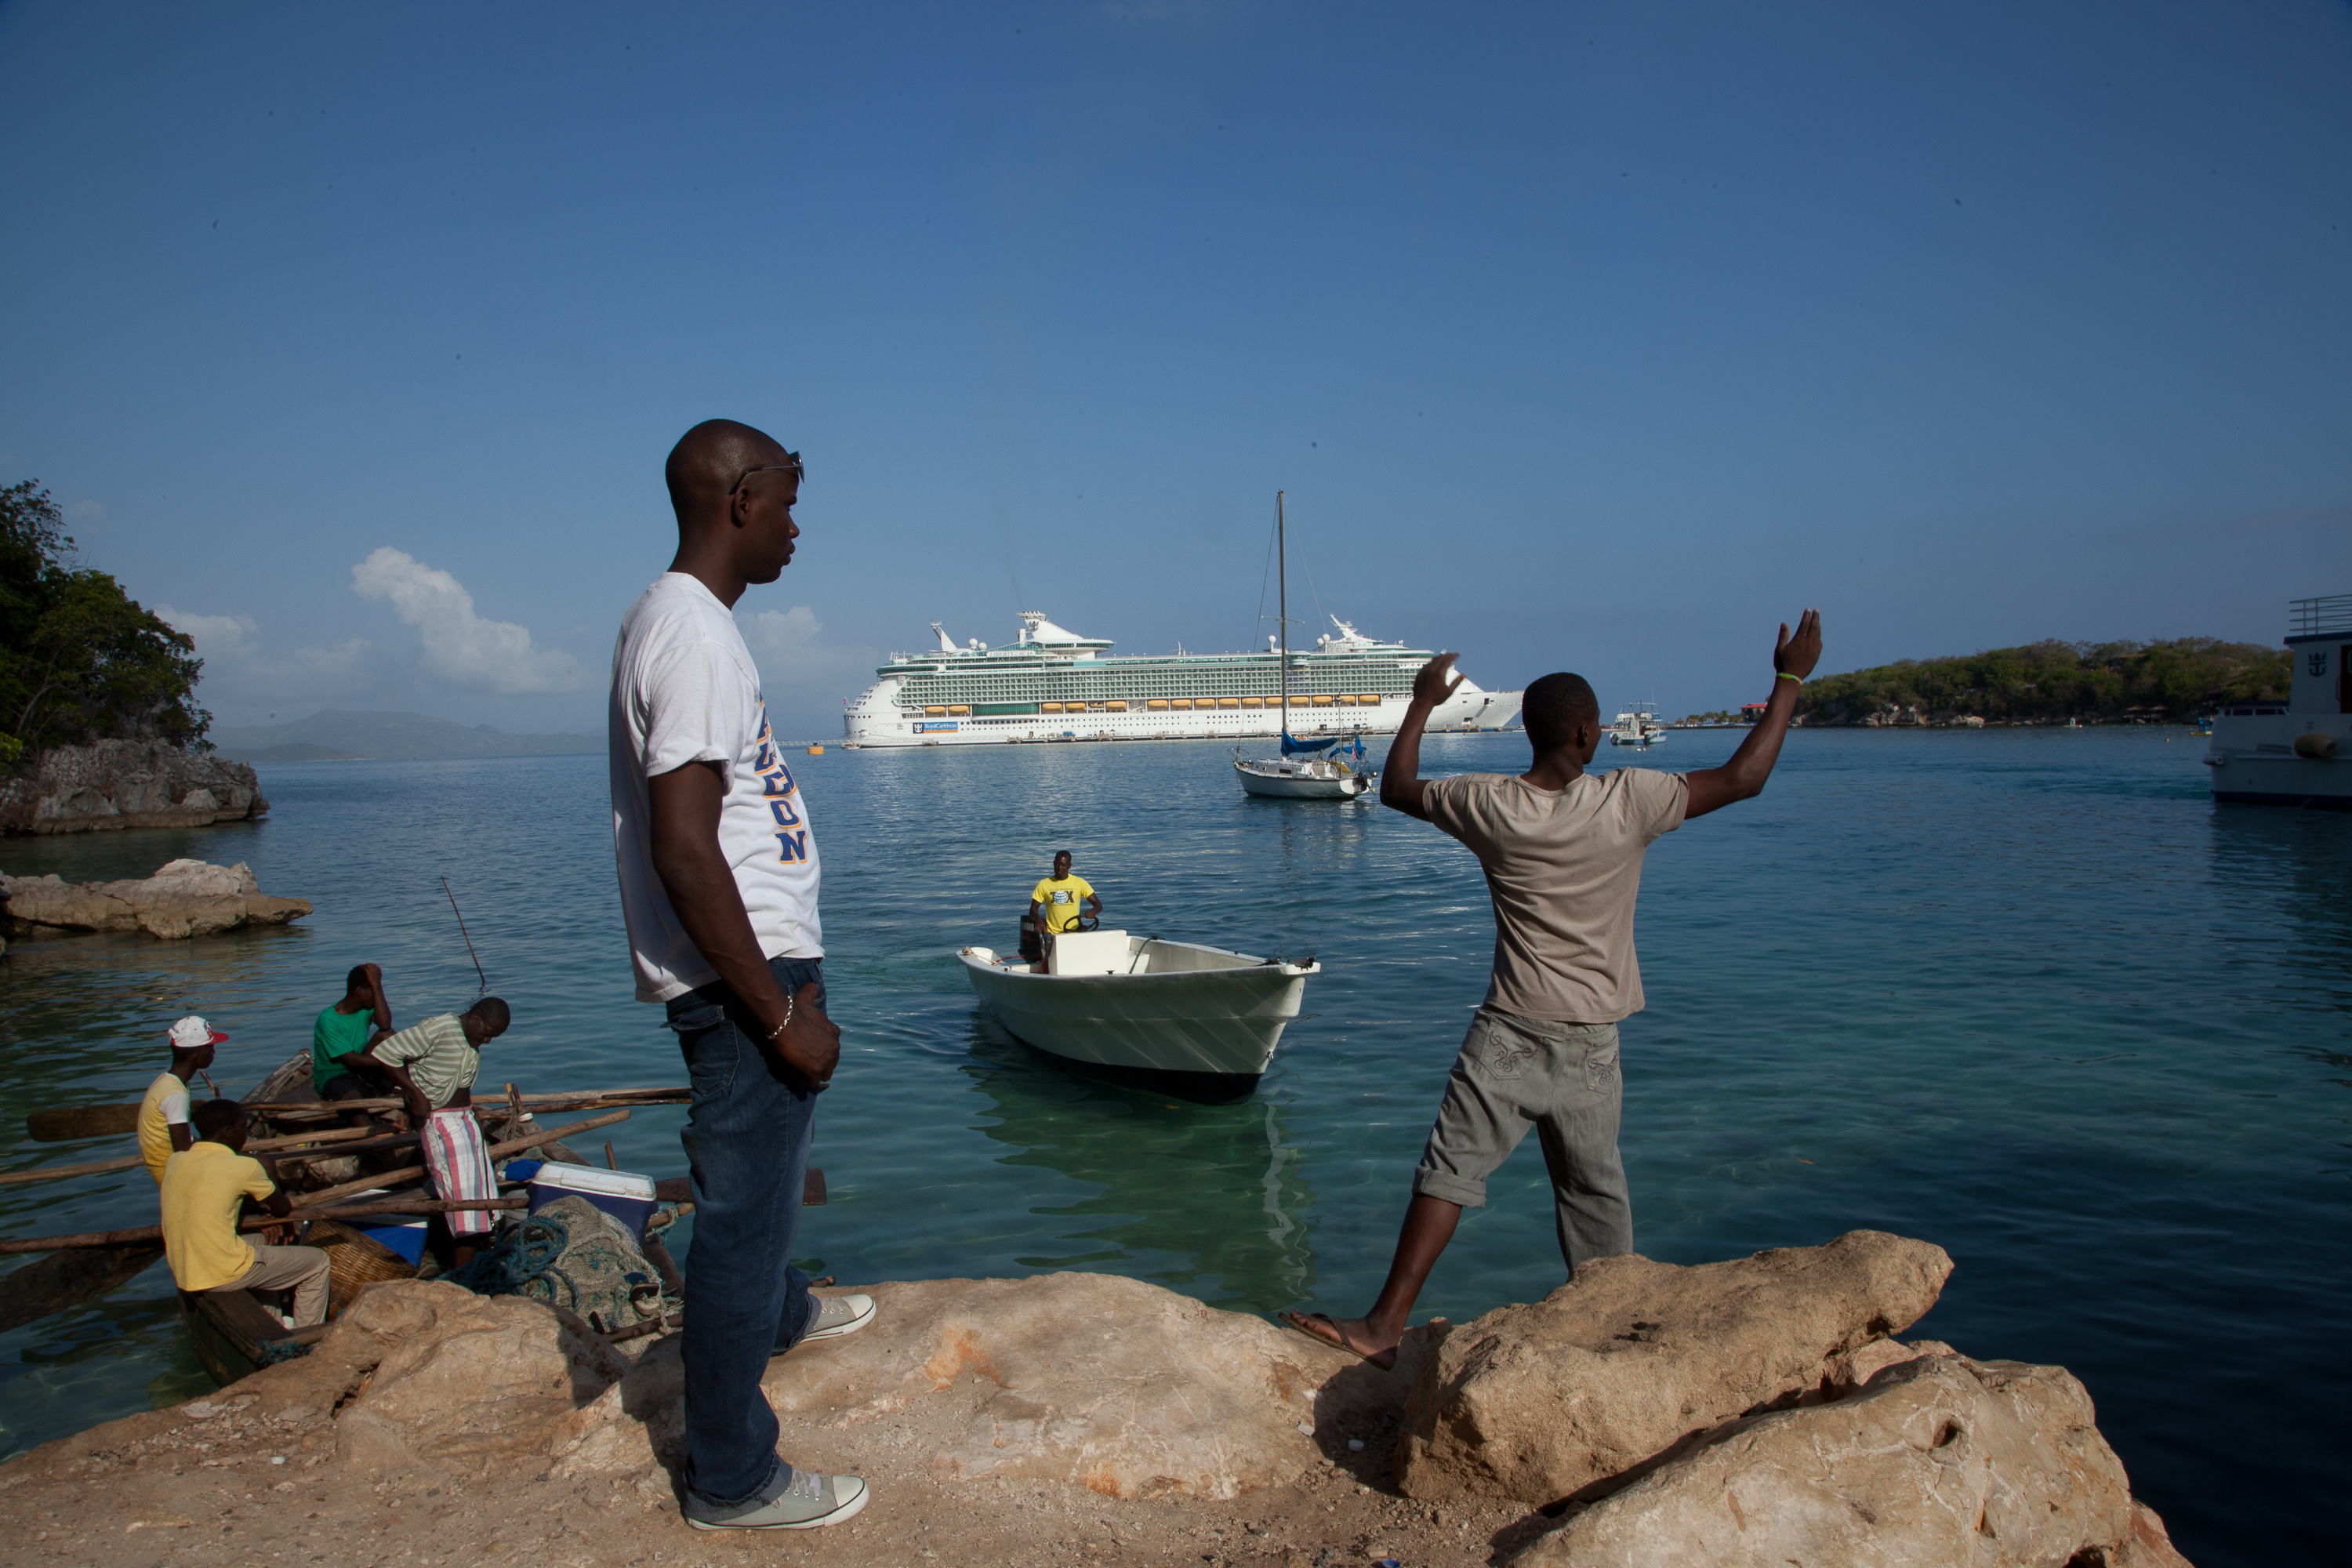 A Royal Caribbean cruise ship seen from the village of Labadie, Haiti, on July 22, 2015. (Caterina Clerici for Time)